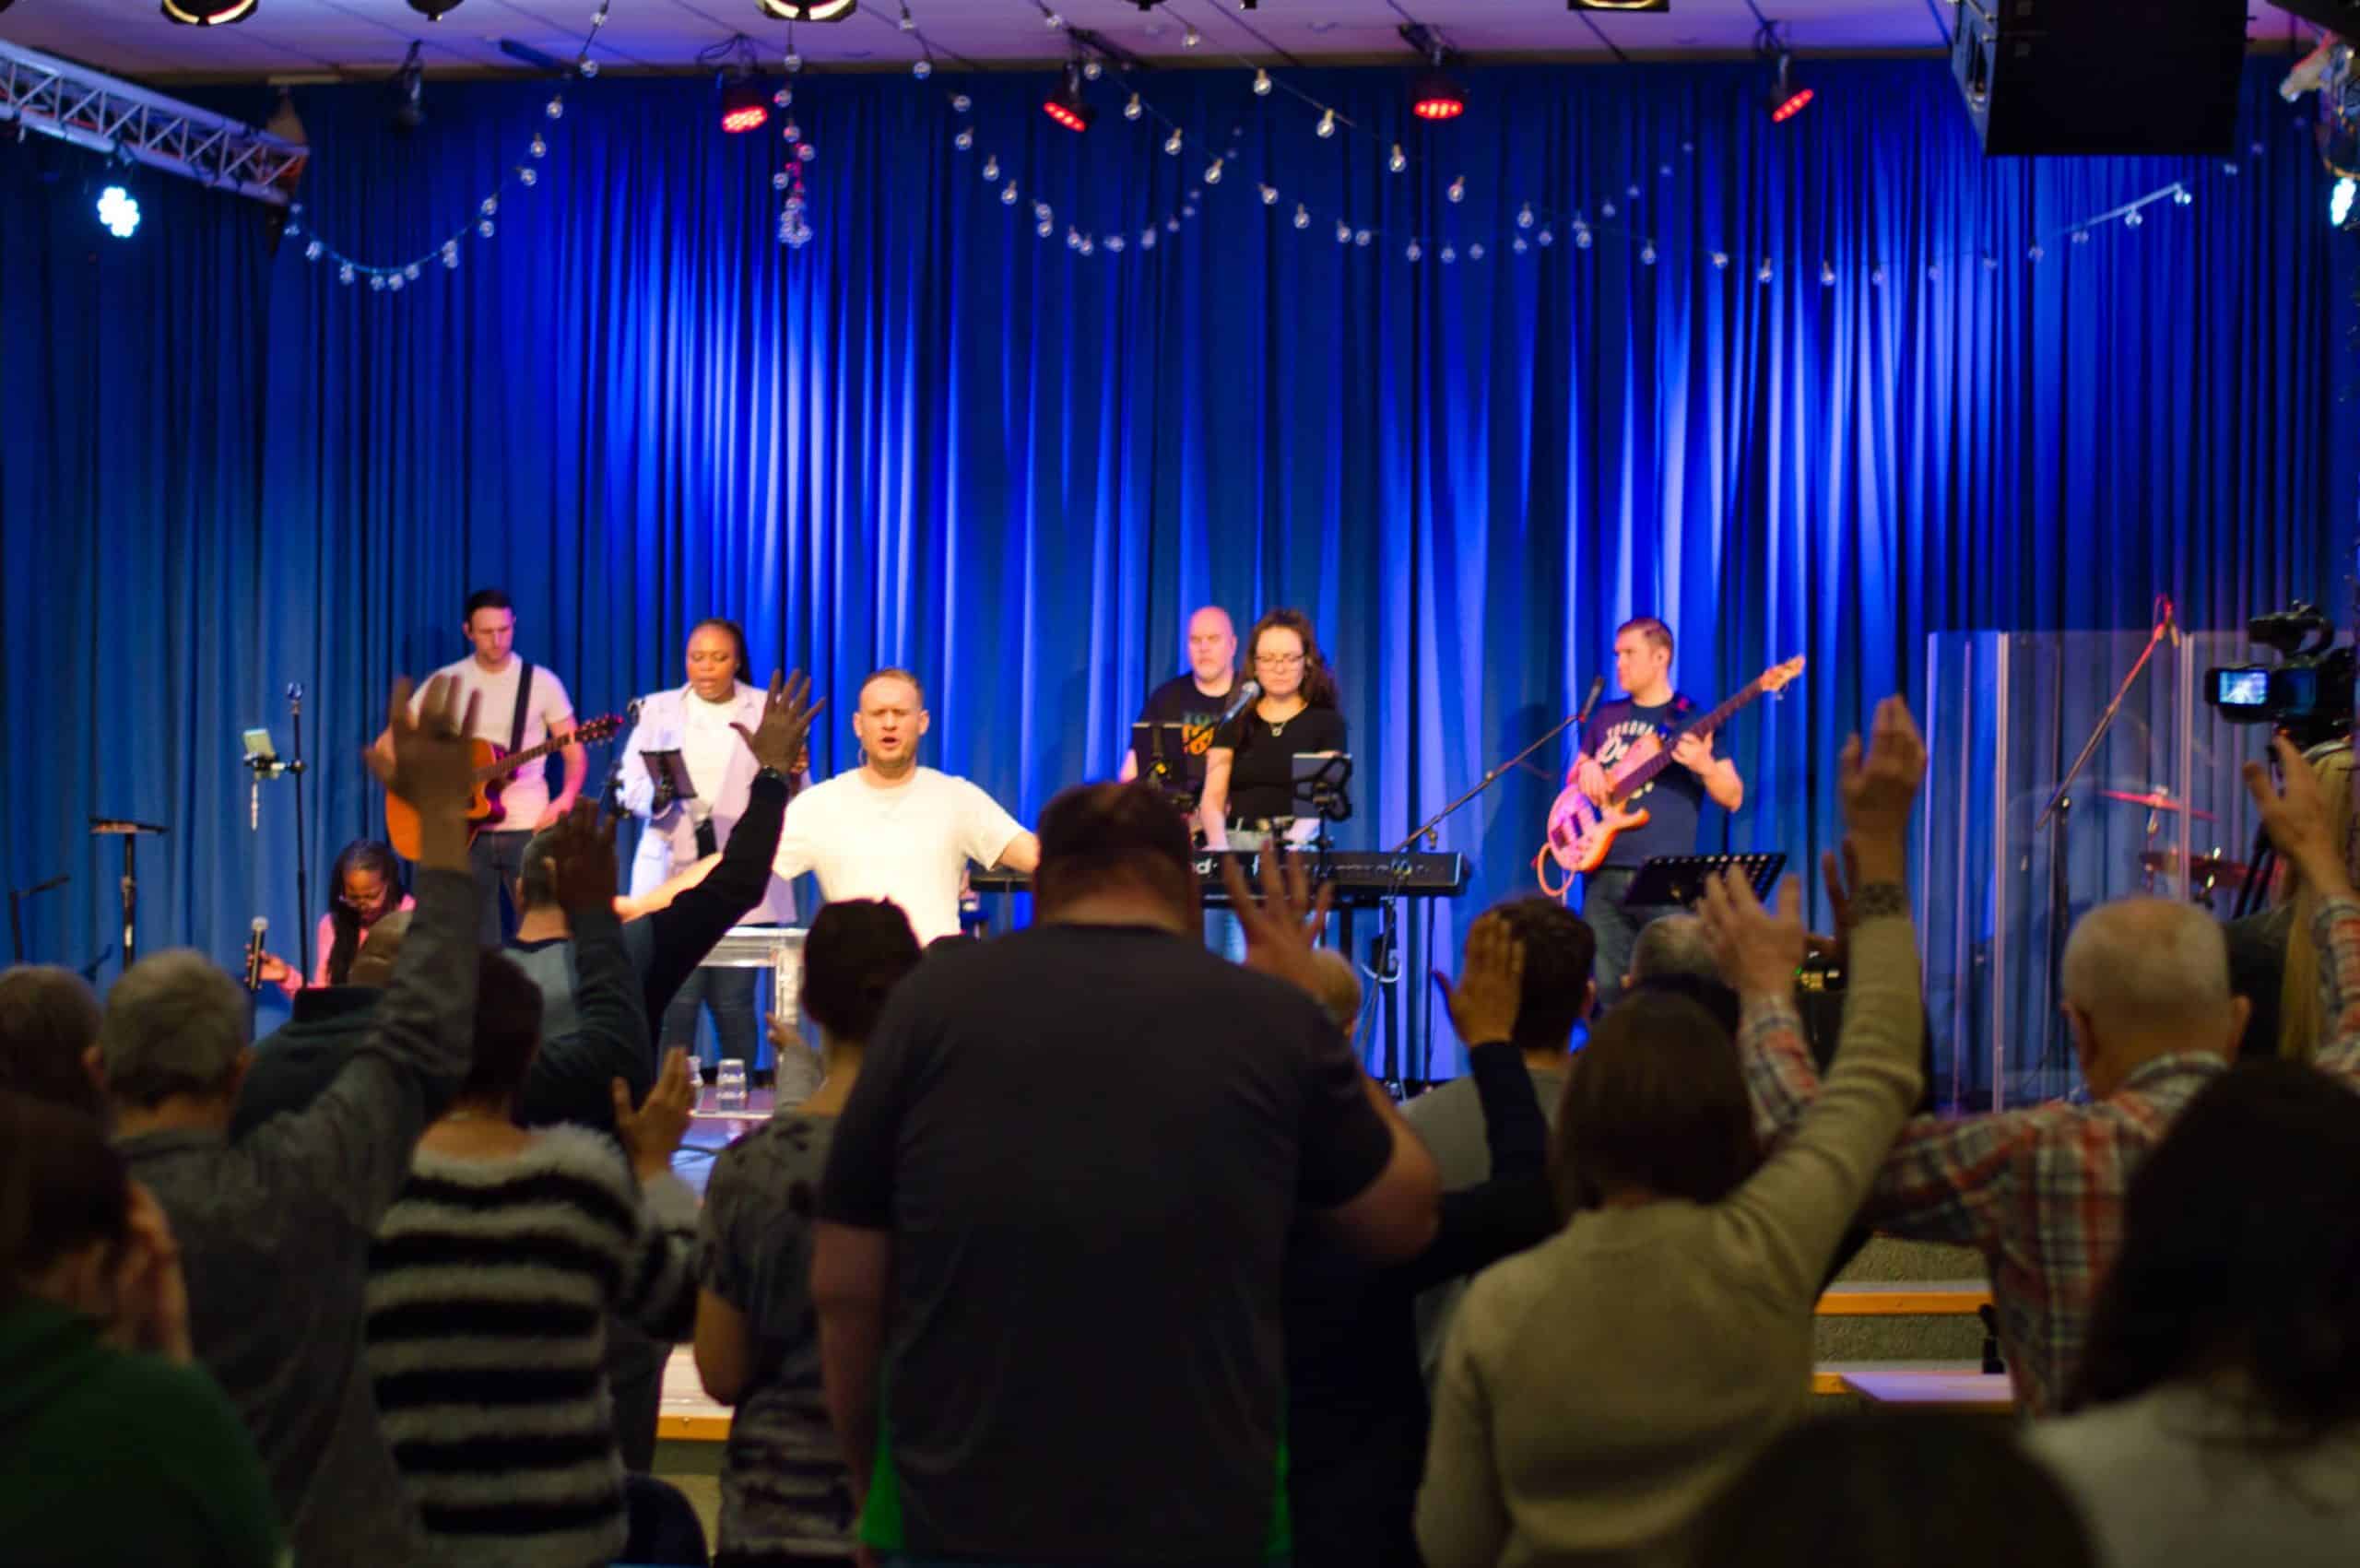 The worship team on stage leading worship at TVCC, the congregation stood with their hands raised in worship